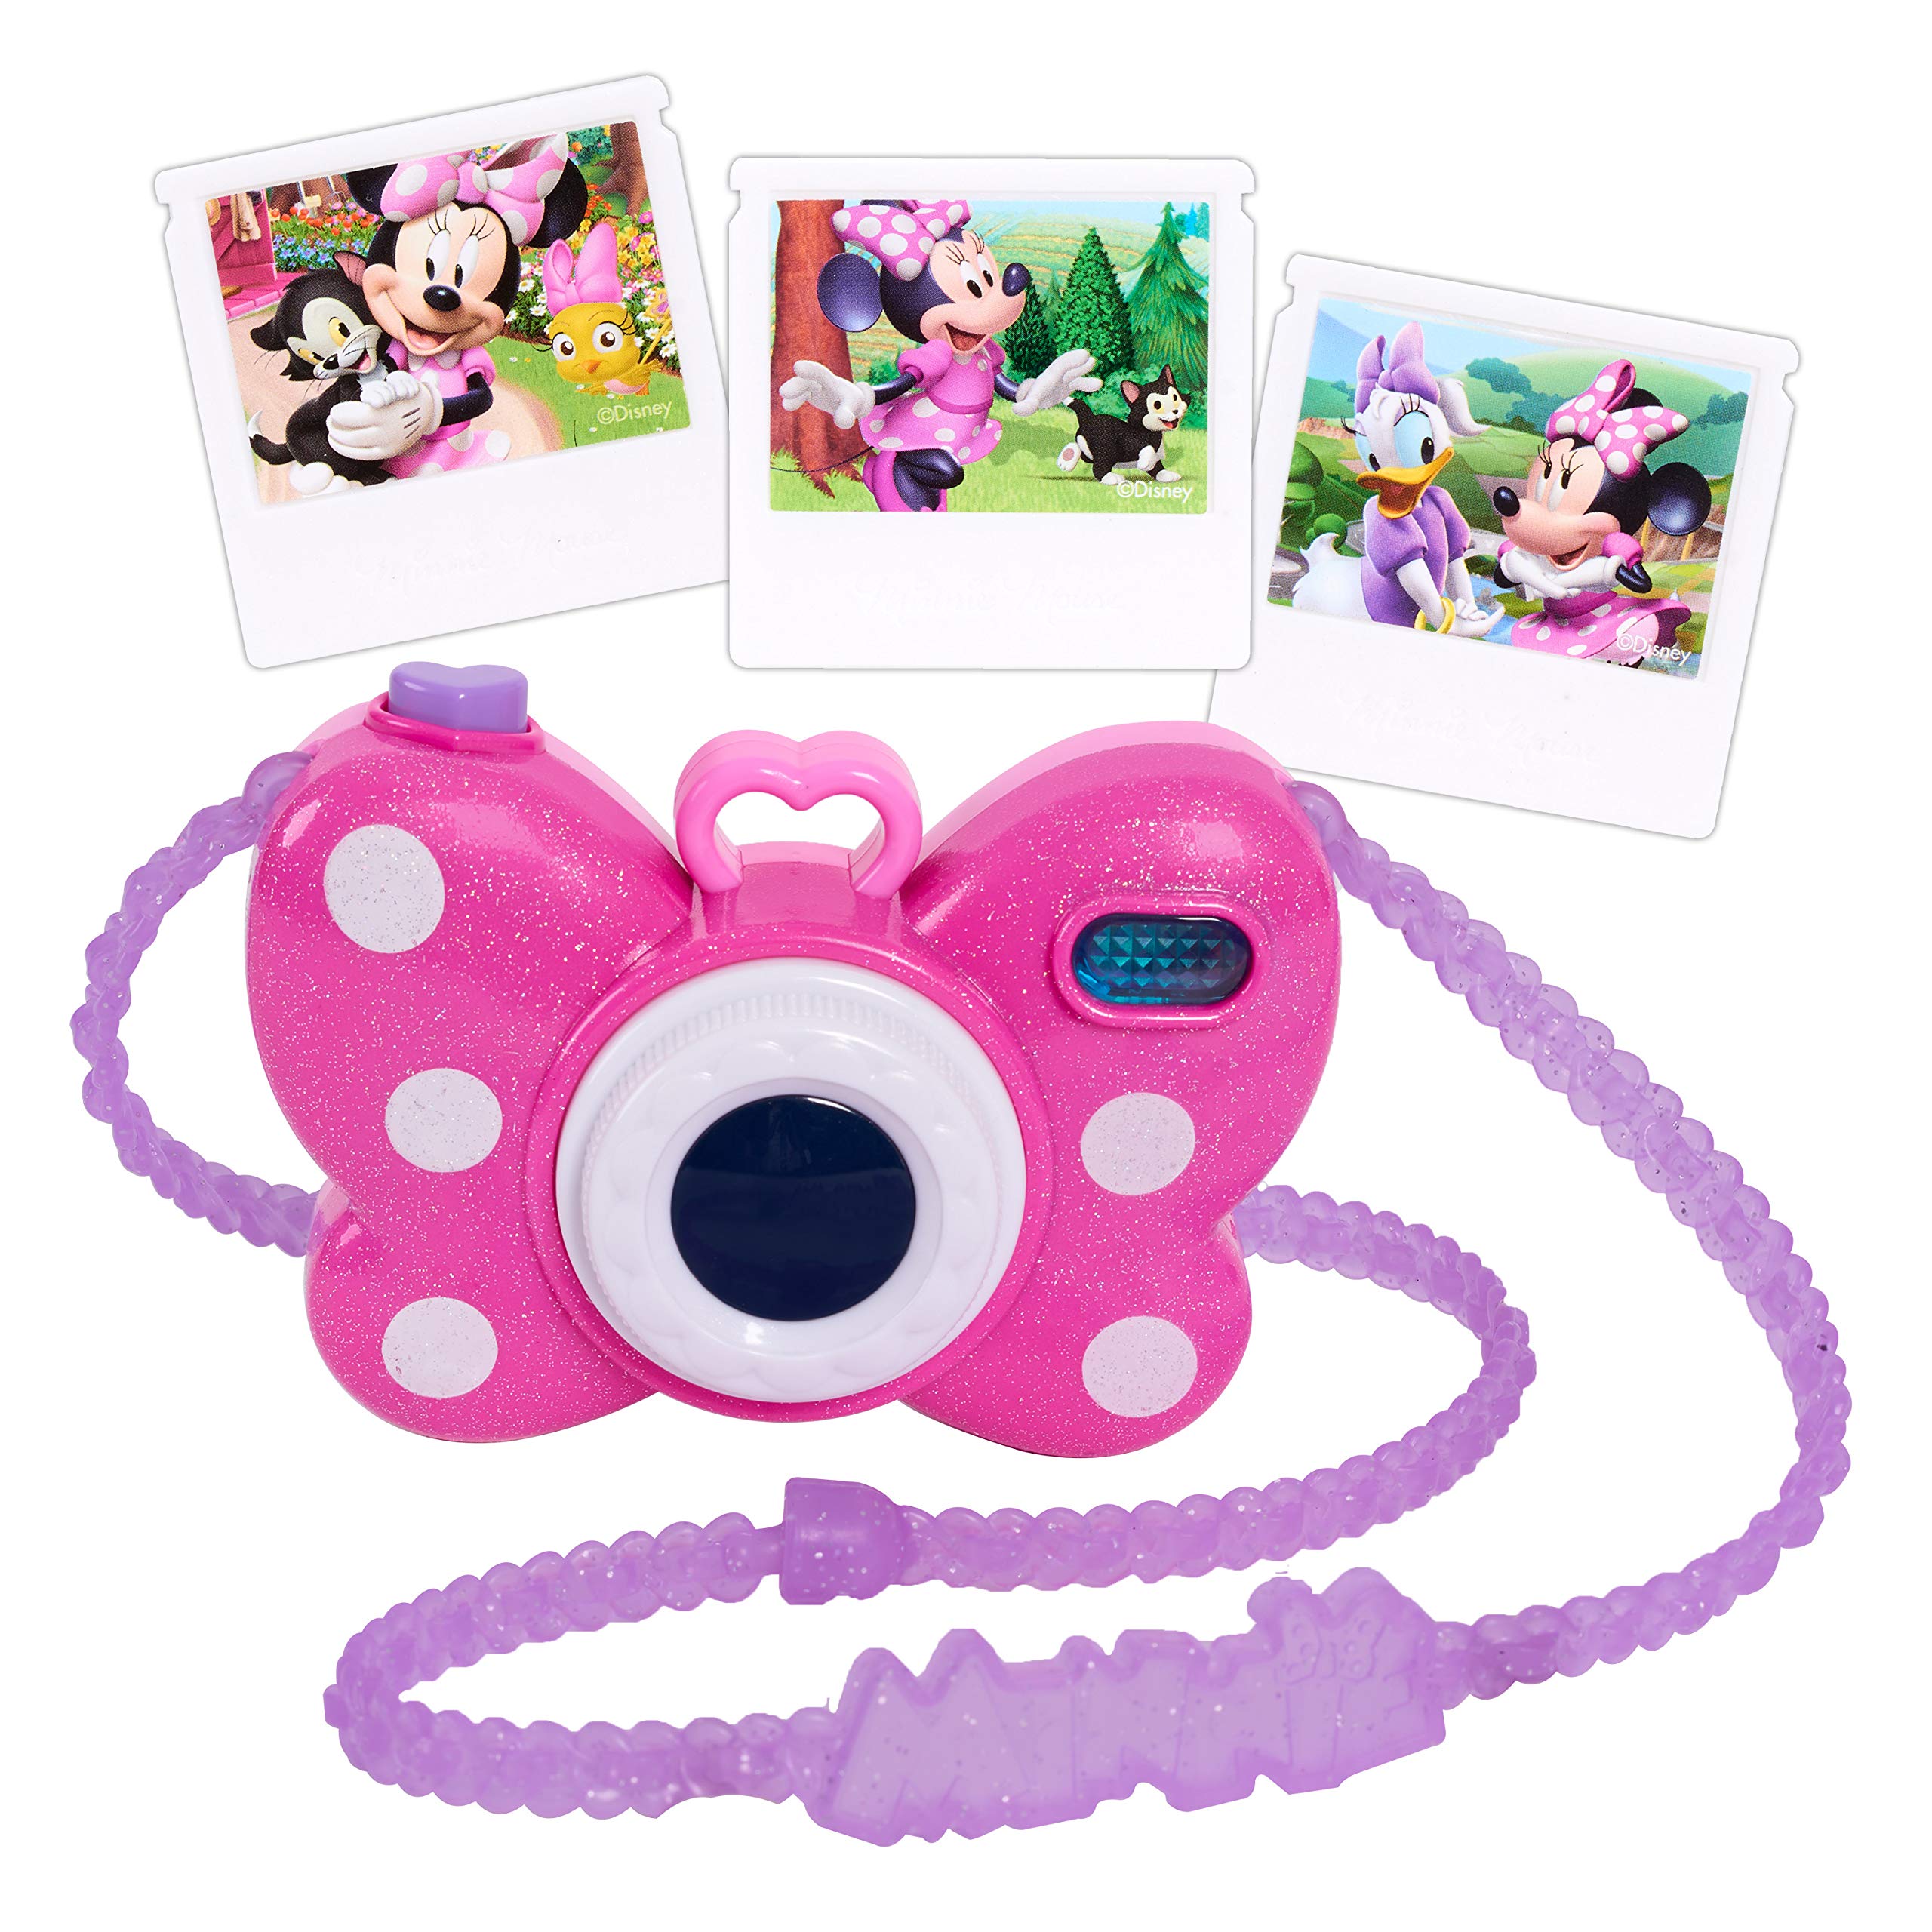 Disney Junior Minnie Mouse Picture Perfect Camera, Lights and Realistic Sounds Pretend Play Toy Camera for 3 Year Old Girls, by Just Play